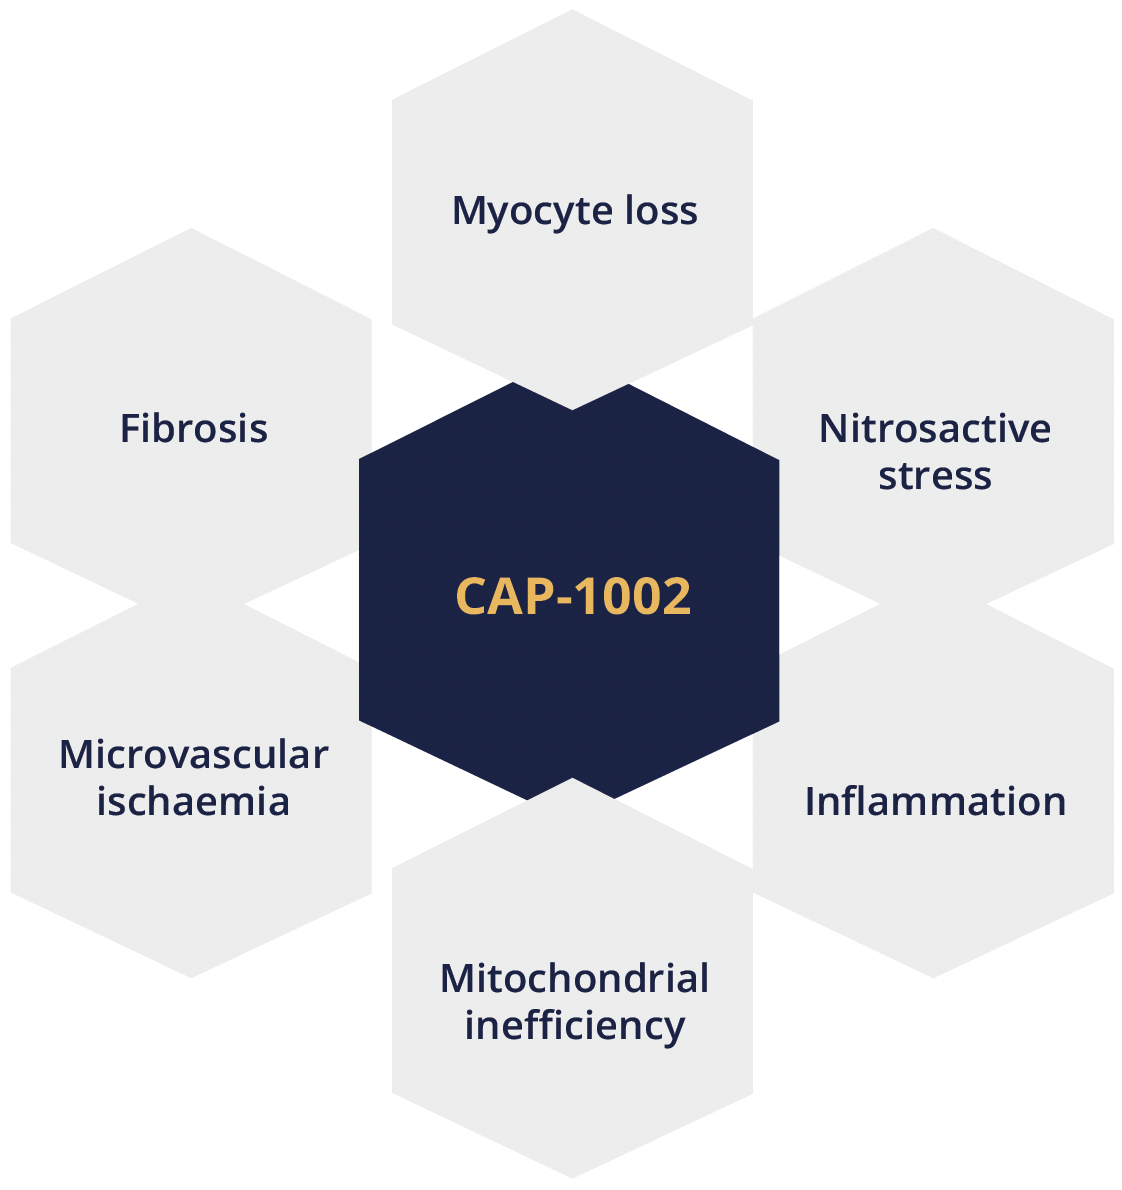 CAP-1002 targets multiple disease processes in DMD including myocyte loss, nitrosactive stress, inflammation, mitochondrial inefficiency, microvascular ischaemia and fibrosis